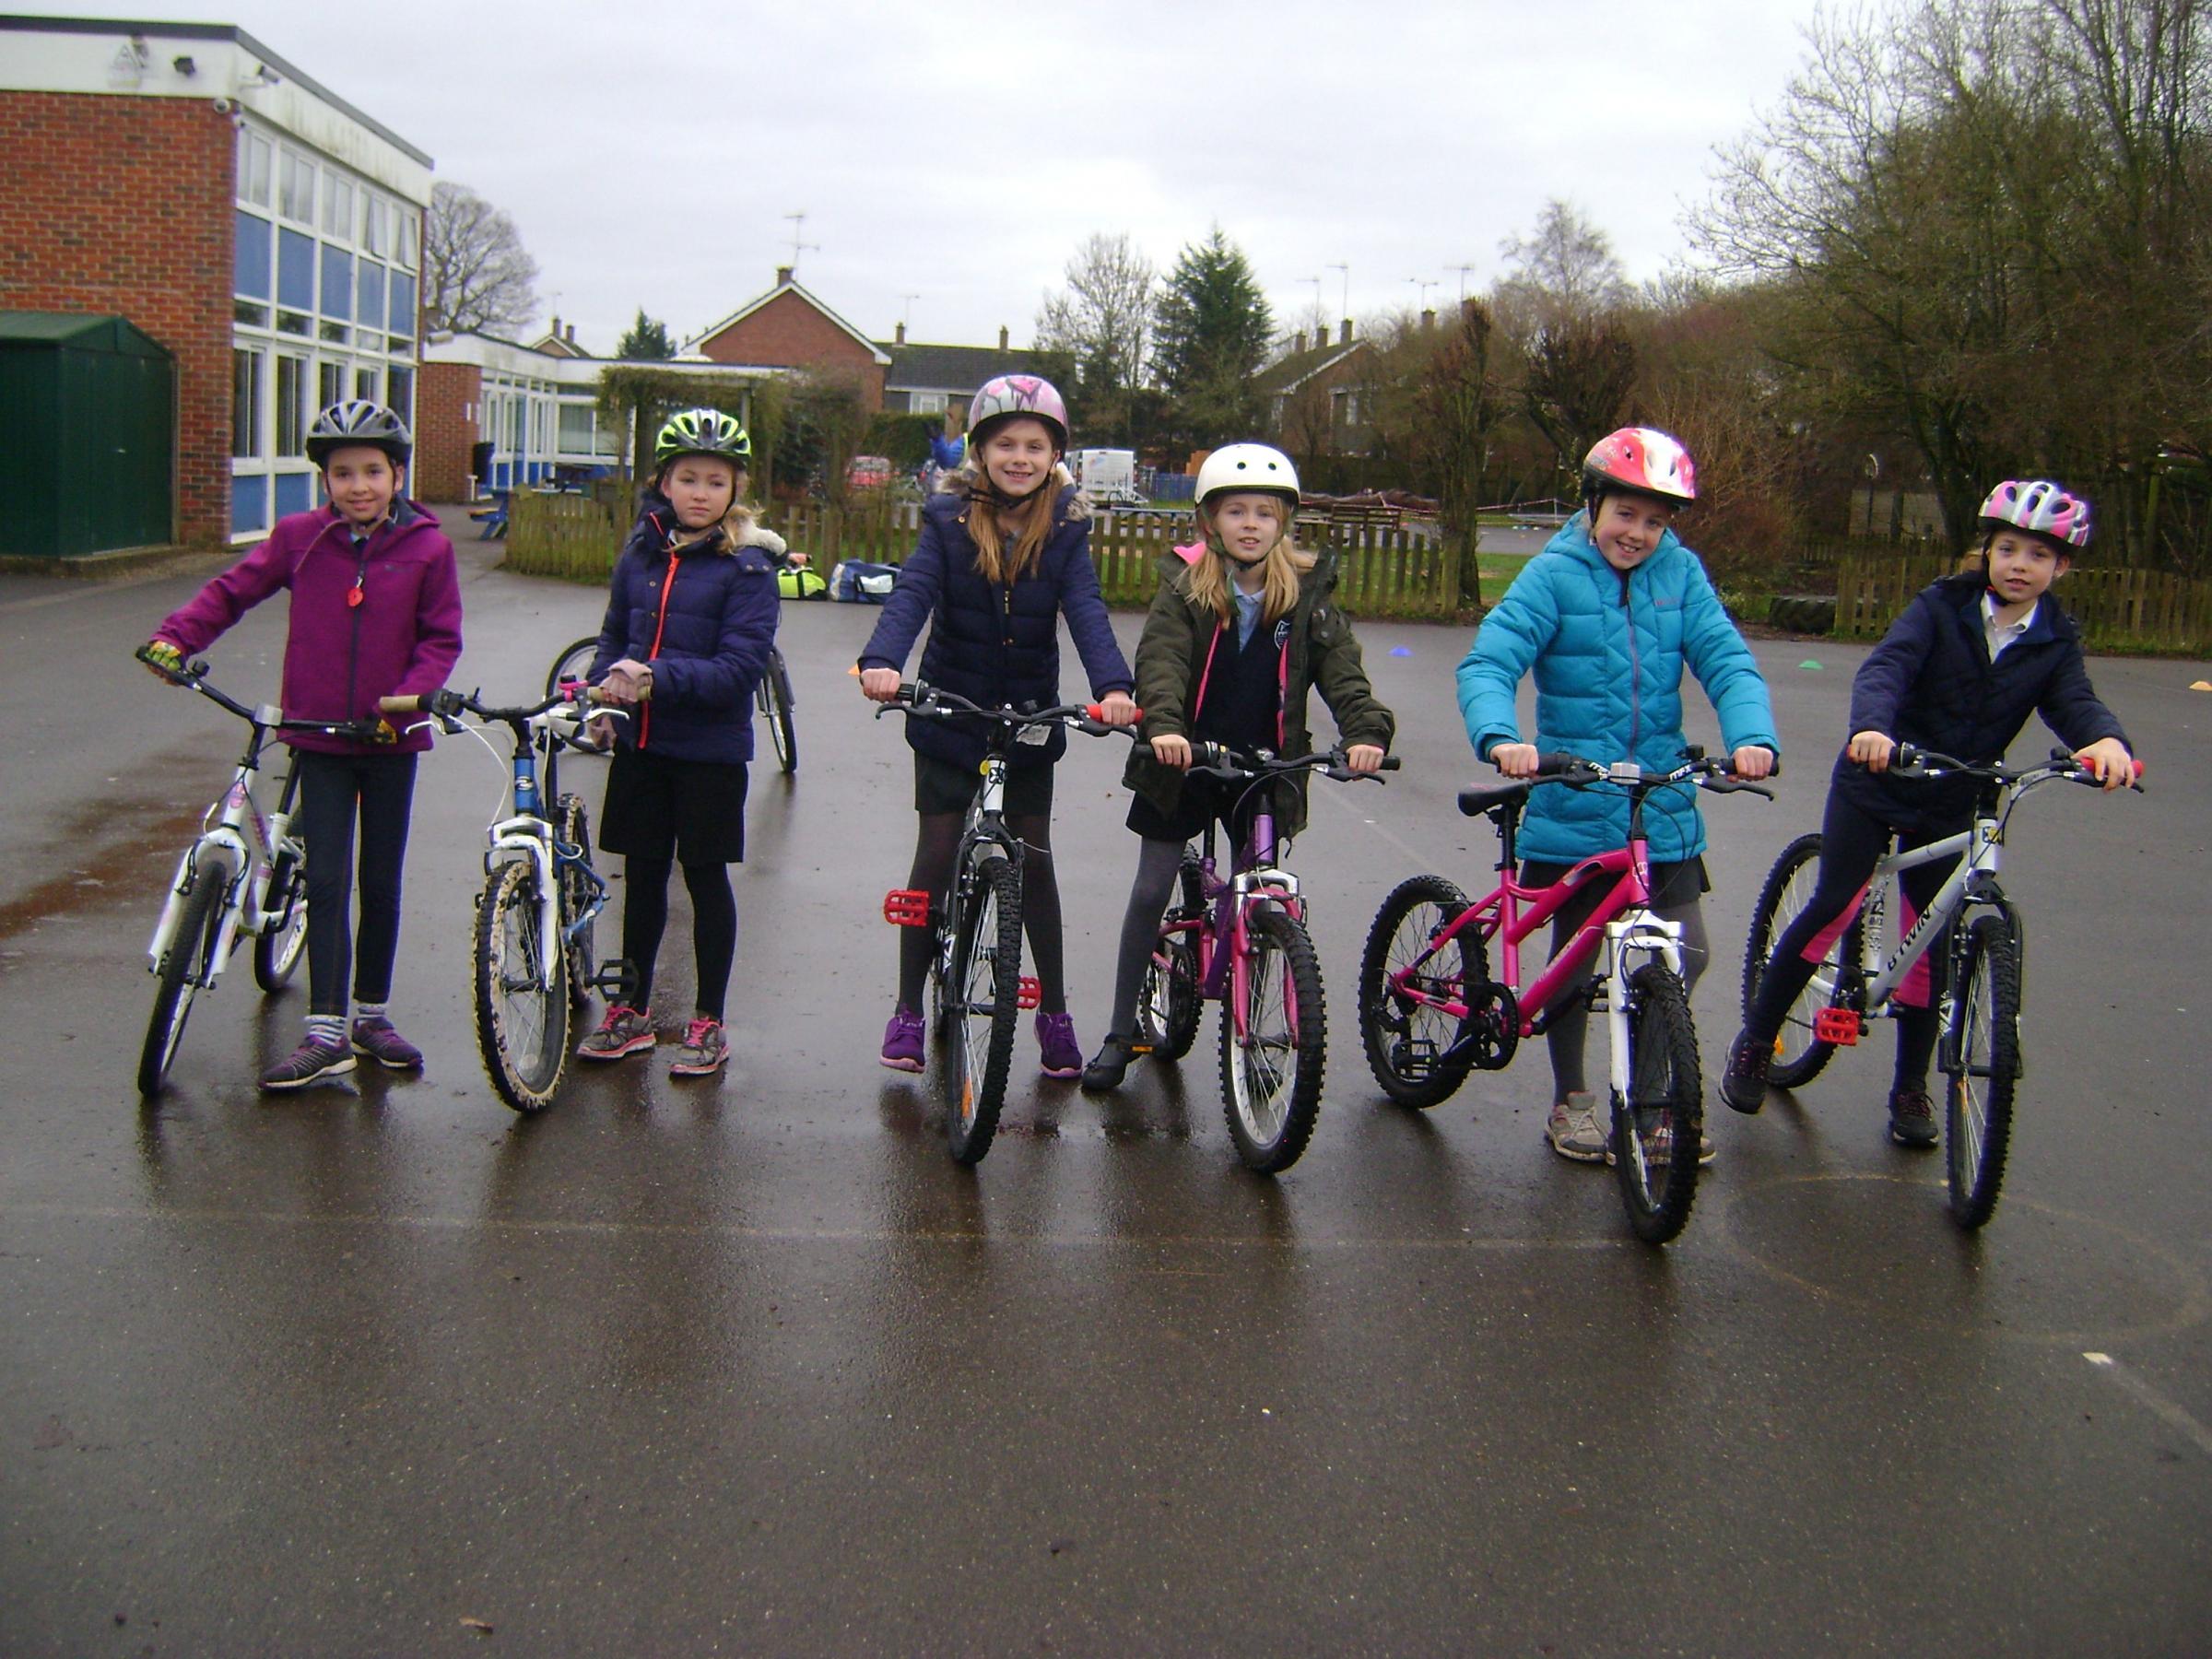 Pupils saddle up to learn about cycling safely - Salisbury Journal